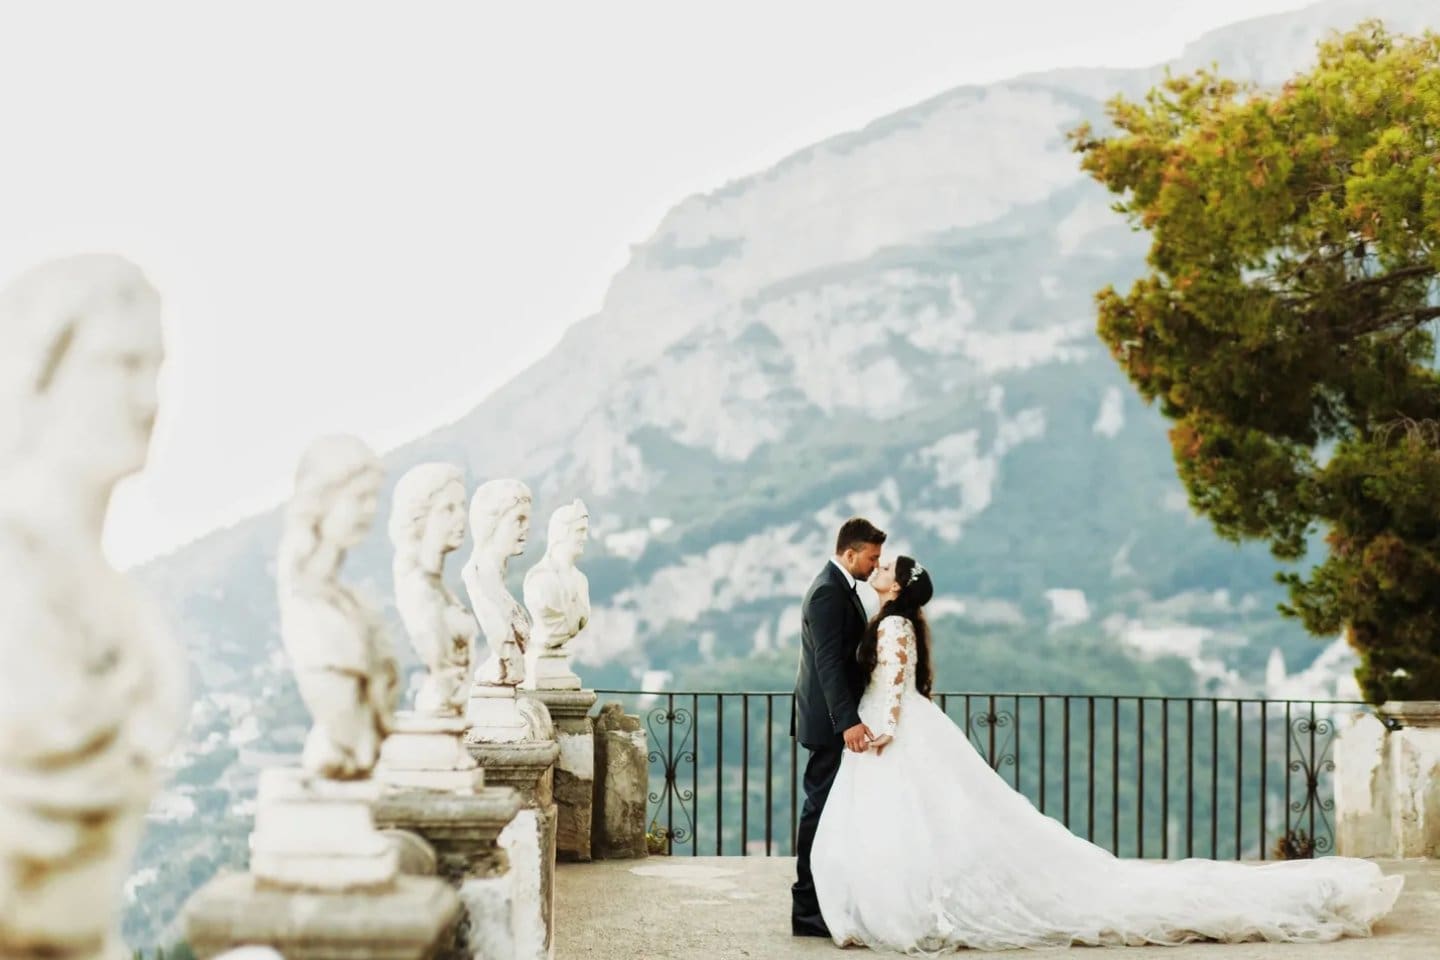 A bride and groom kissing in front of the mountains.